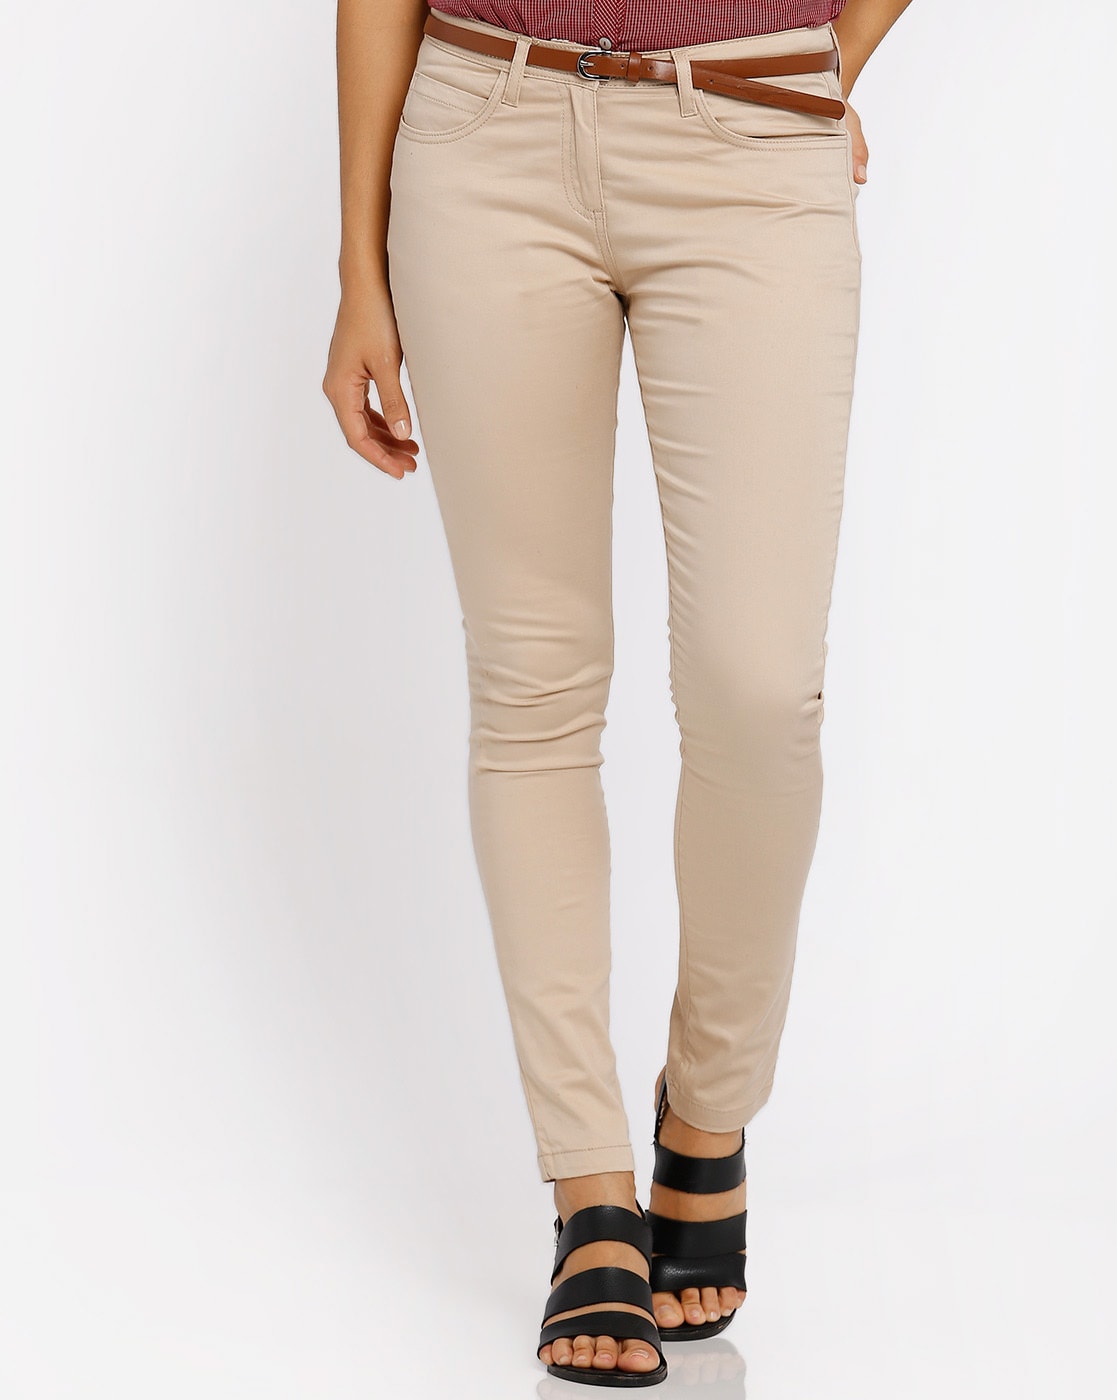 Buy Beige Trousers & Pants for Women by Annabelle by Pantaloons Online |  Ajio.com